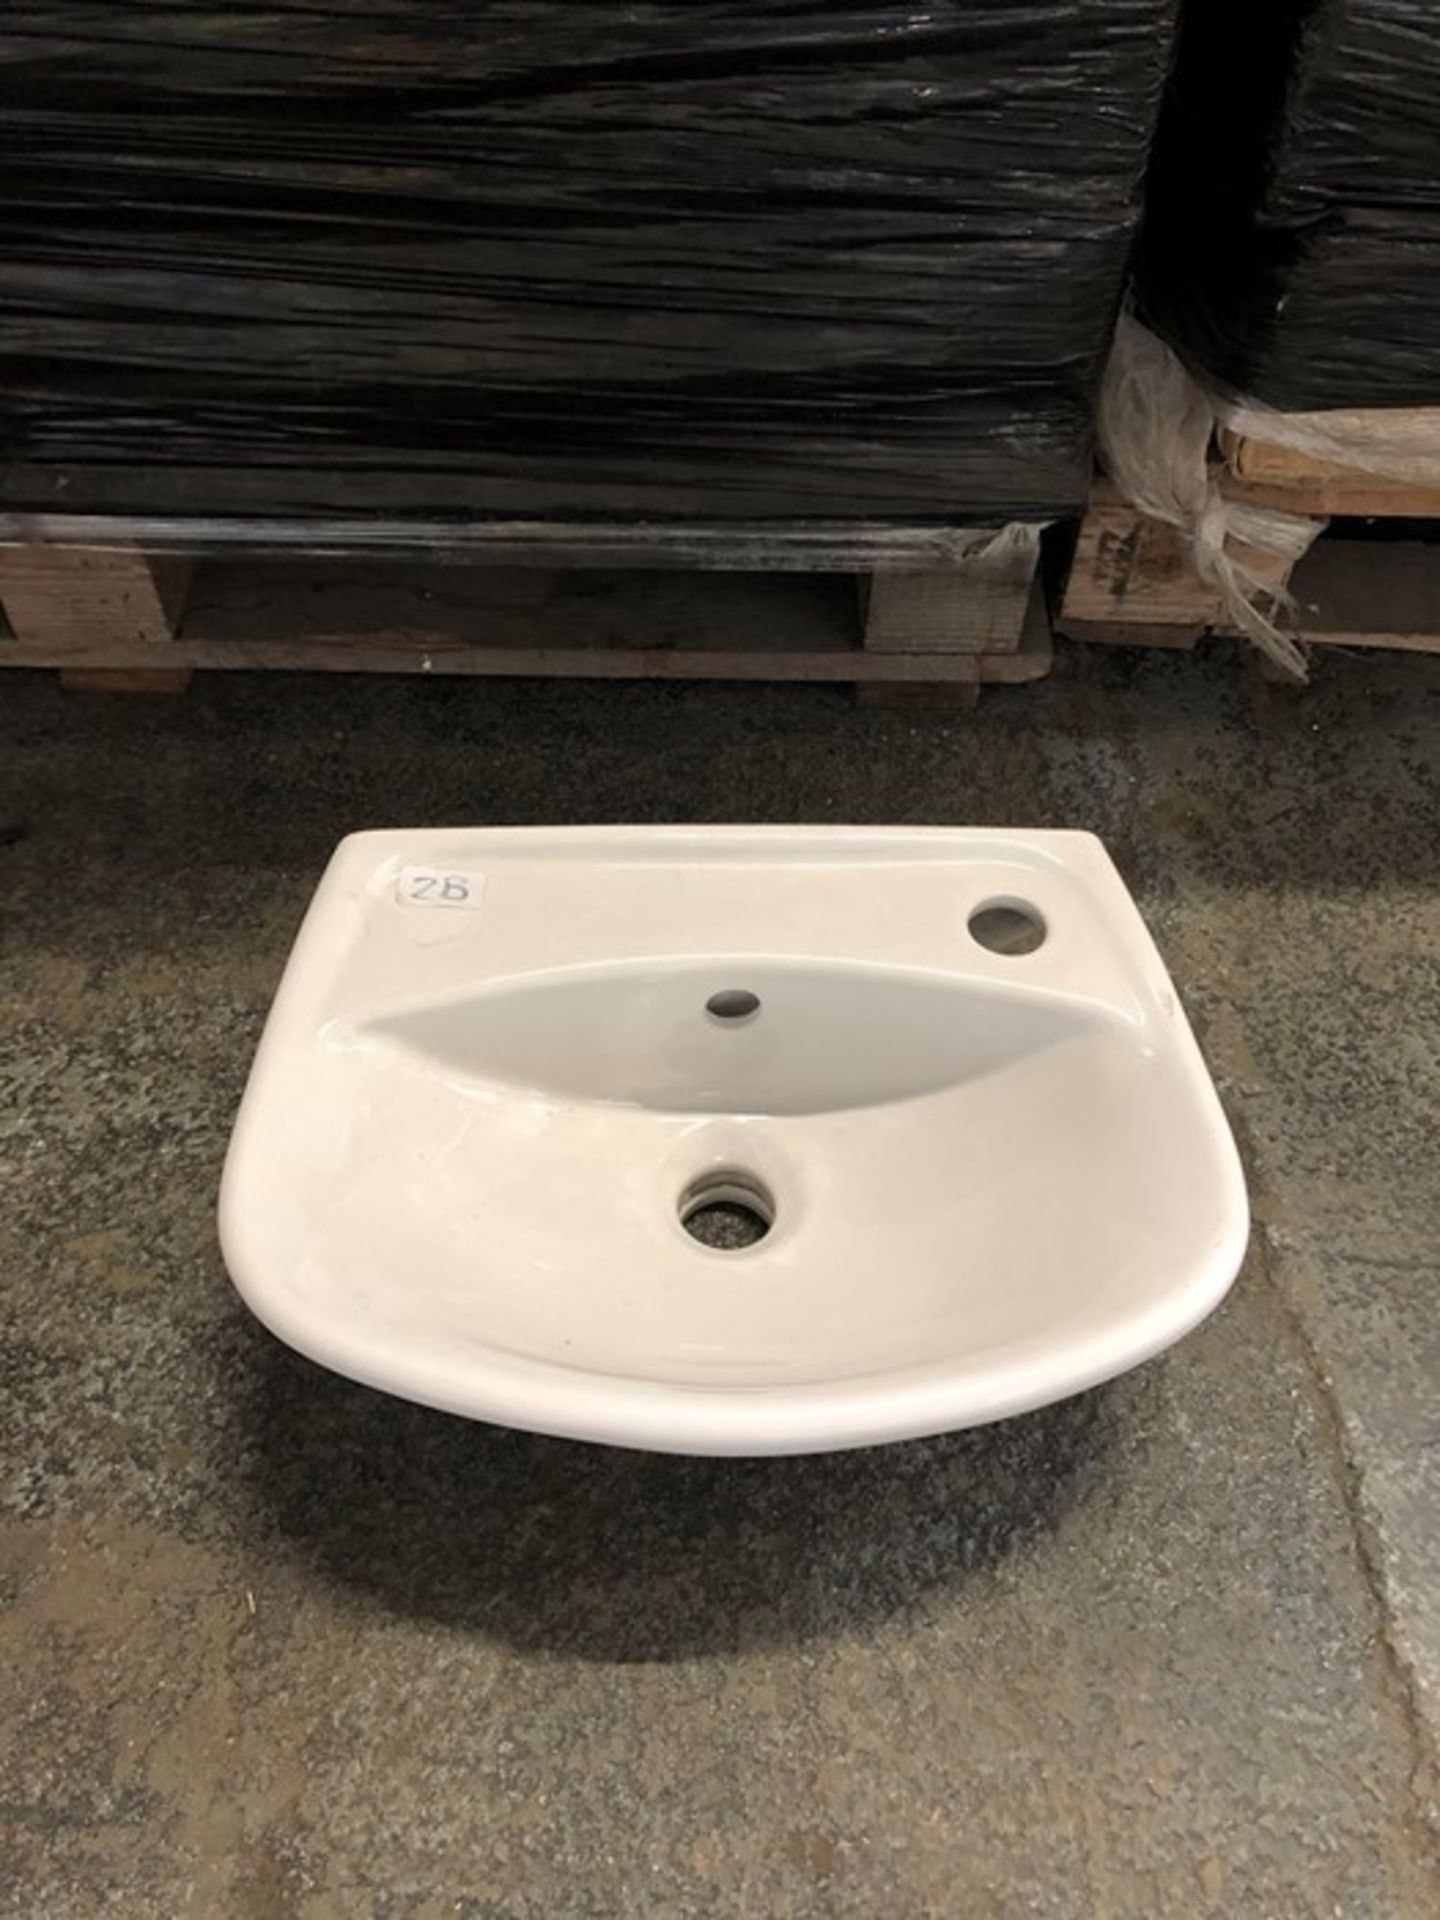 1 GRADE A PORCELAIN SINK BOWL - FITTINGS NOT INCLUDED (VIEWING HIGHLY RECOMMENDED)